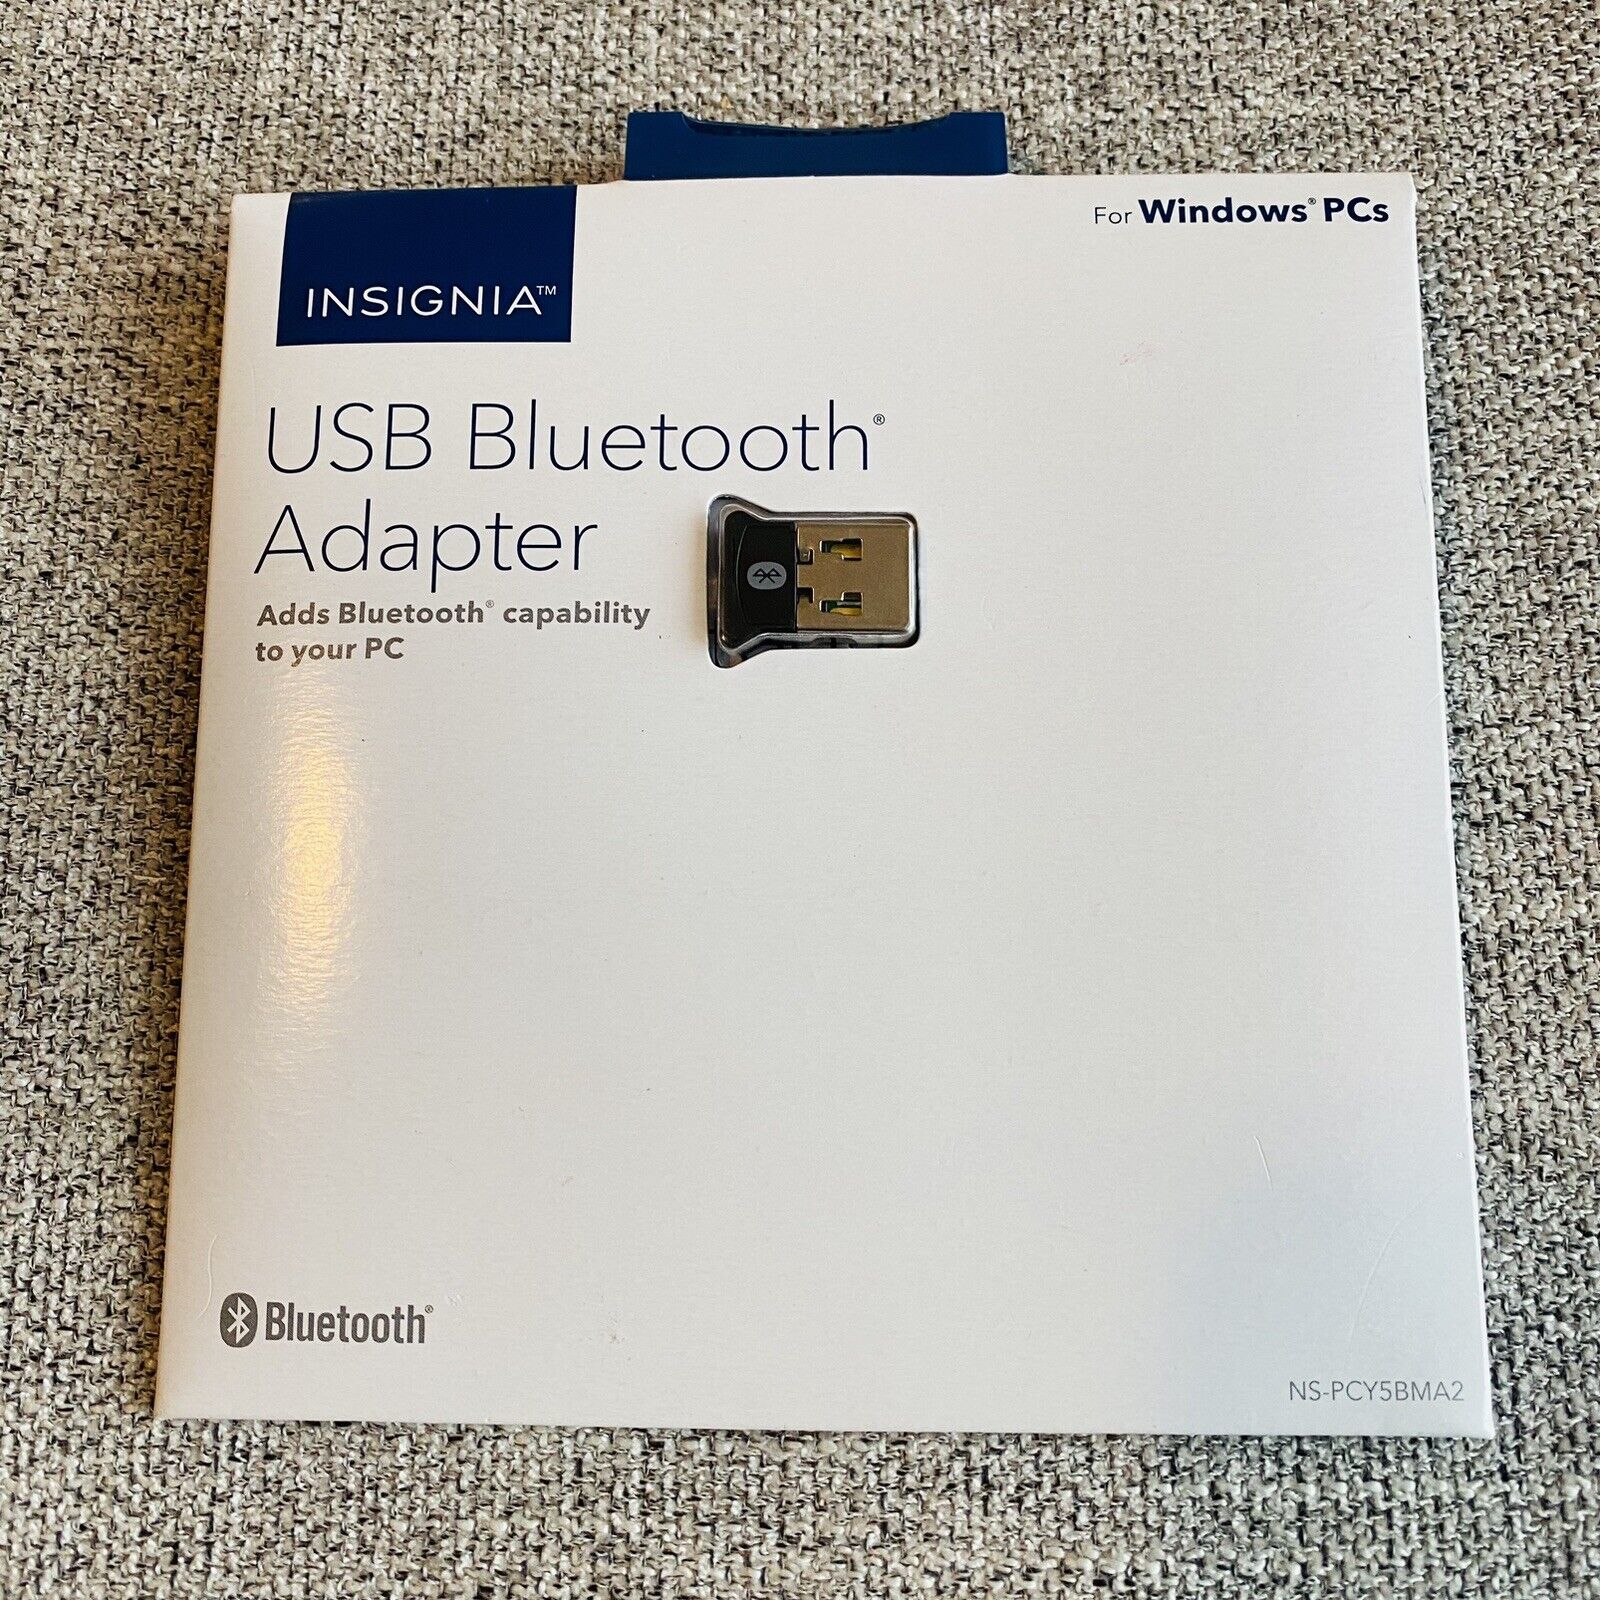 New Sealed Insignia Bluetooth 4.0 USB Adapter Adds Bluetooth To PC